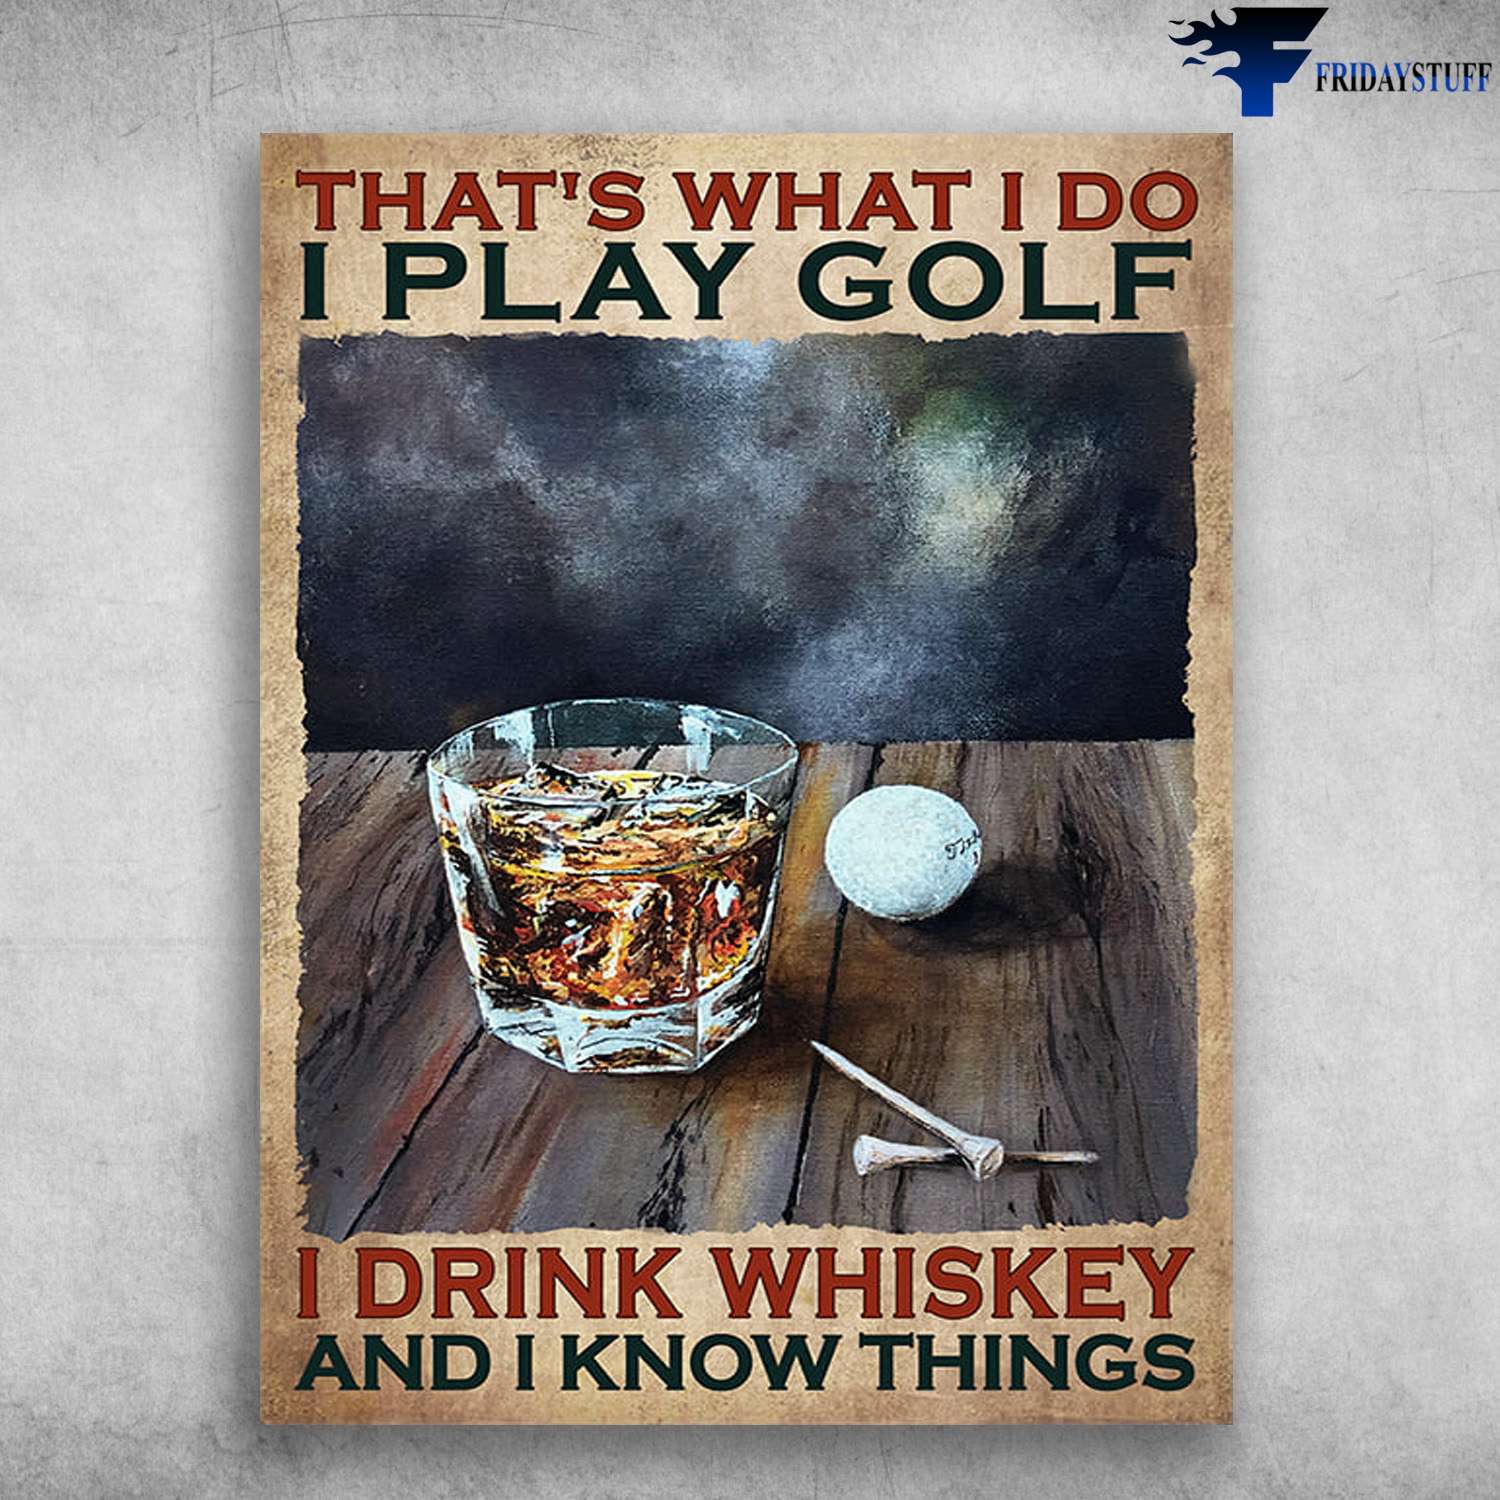 Golf And Drink, Wine Lover - That's What I Do, I Play Golf, I Drink Whiskey, And I Know Things